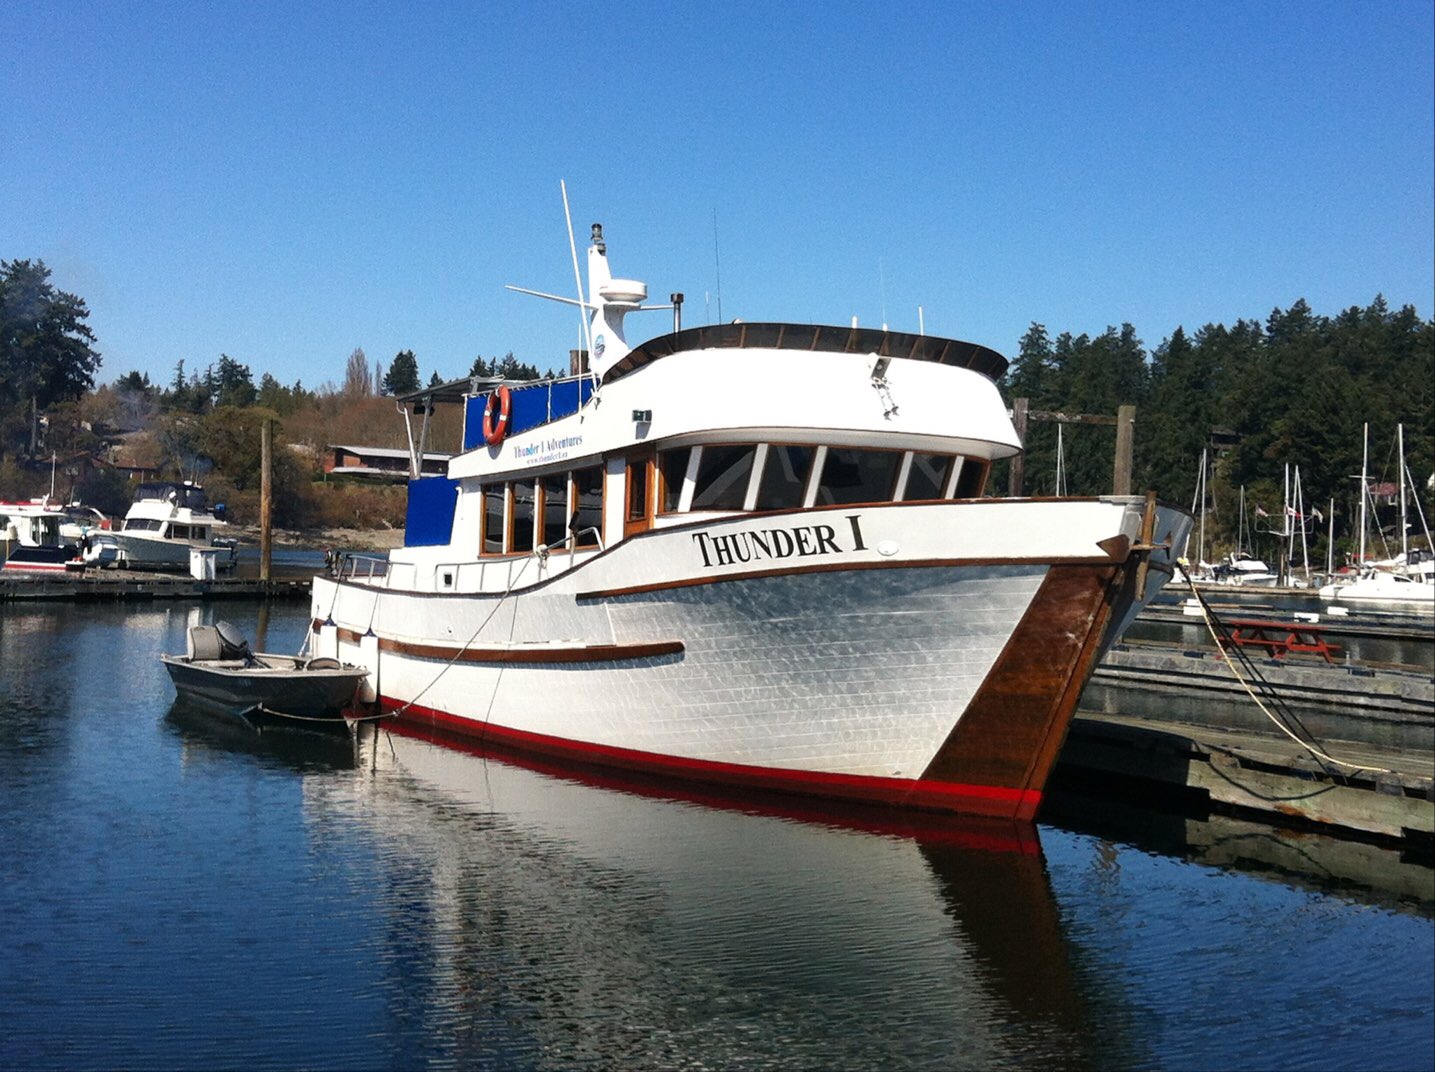 1984 52 foot Other Trawler Power boat for sale in British Columbia, Canada - image 4 